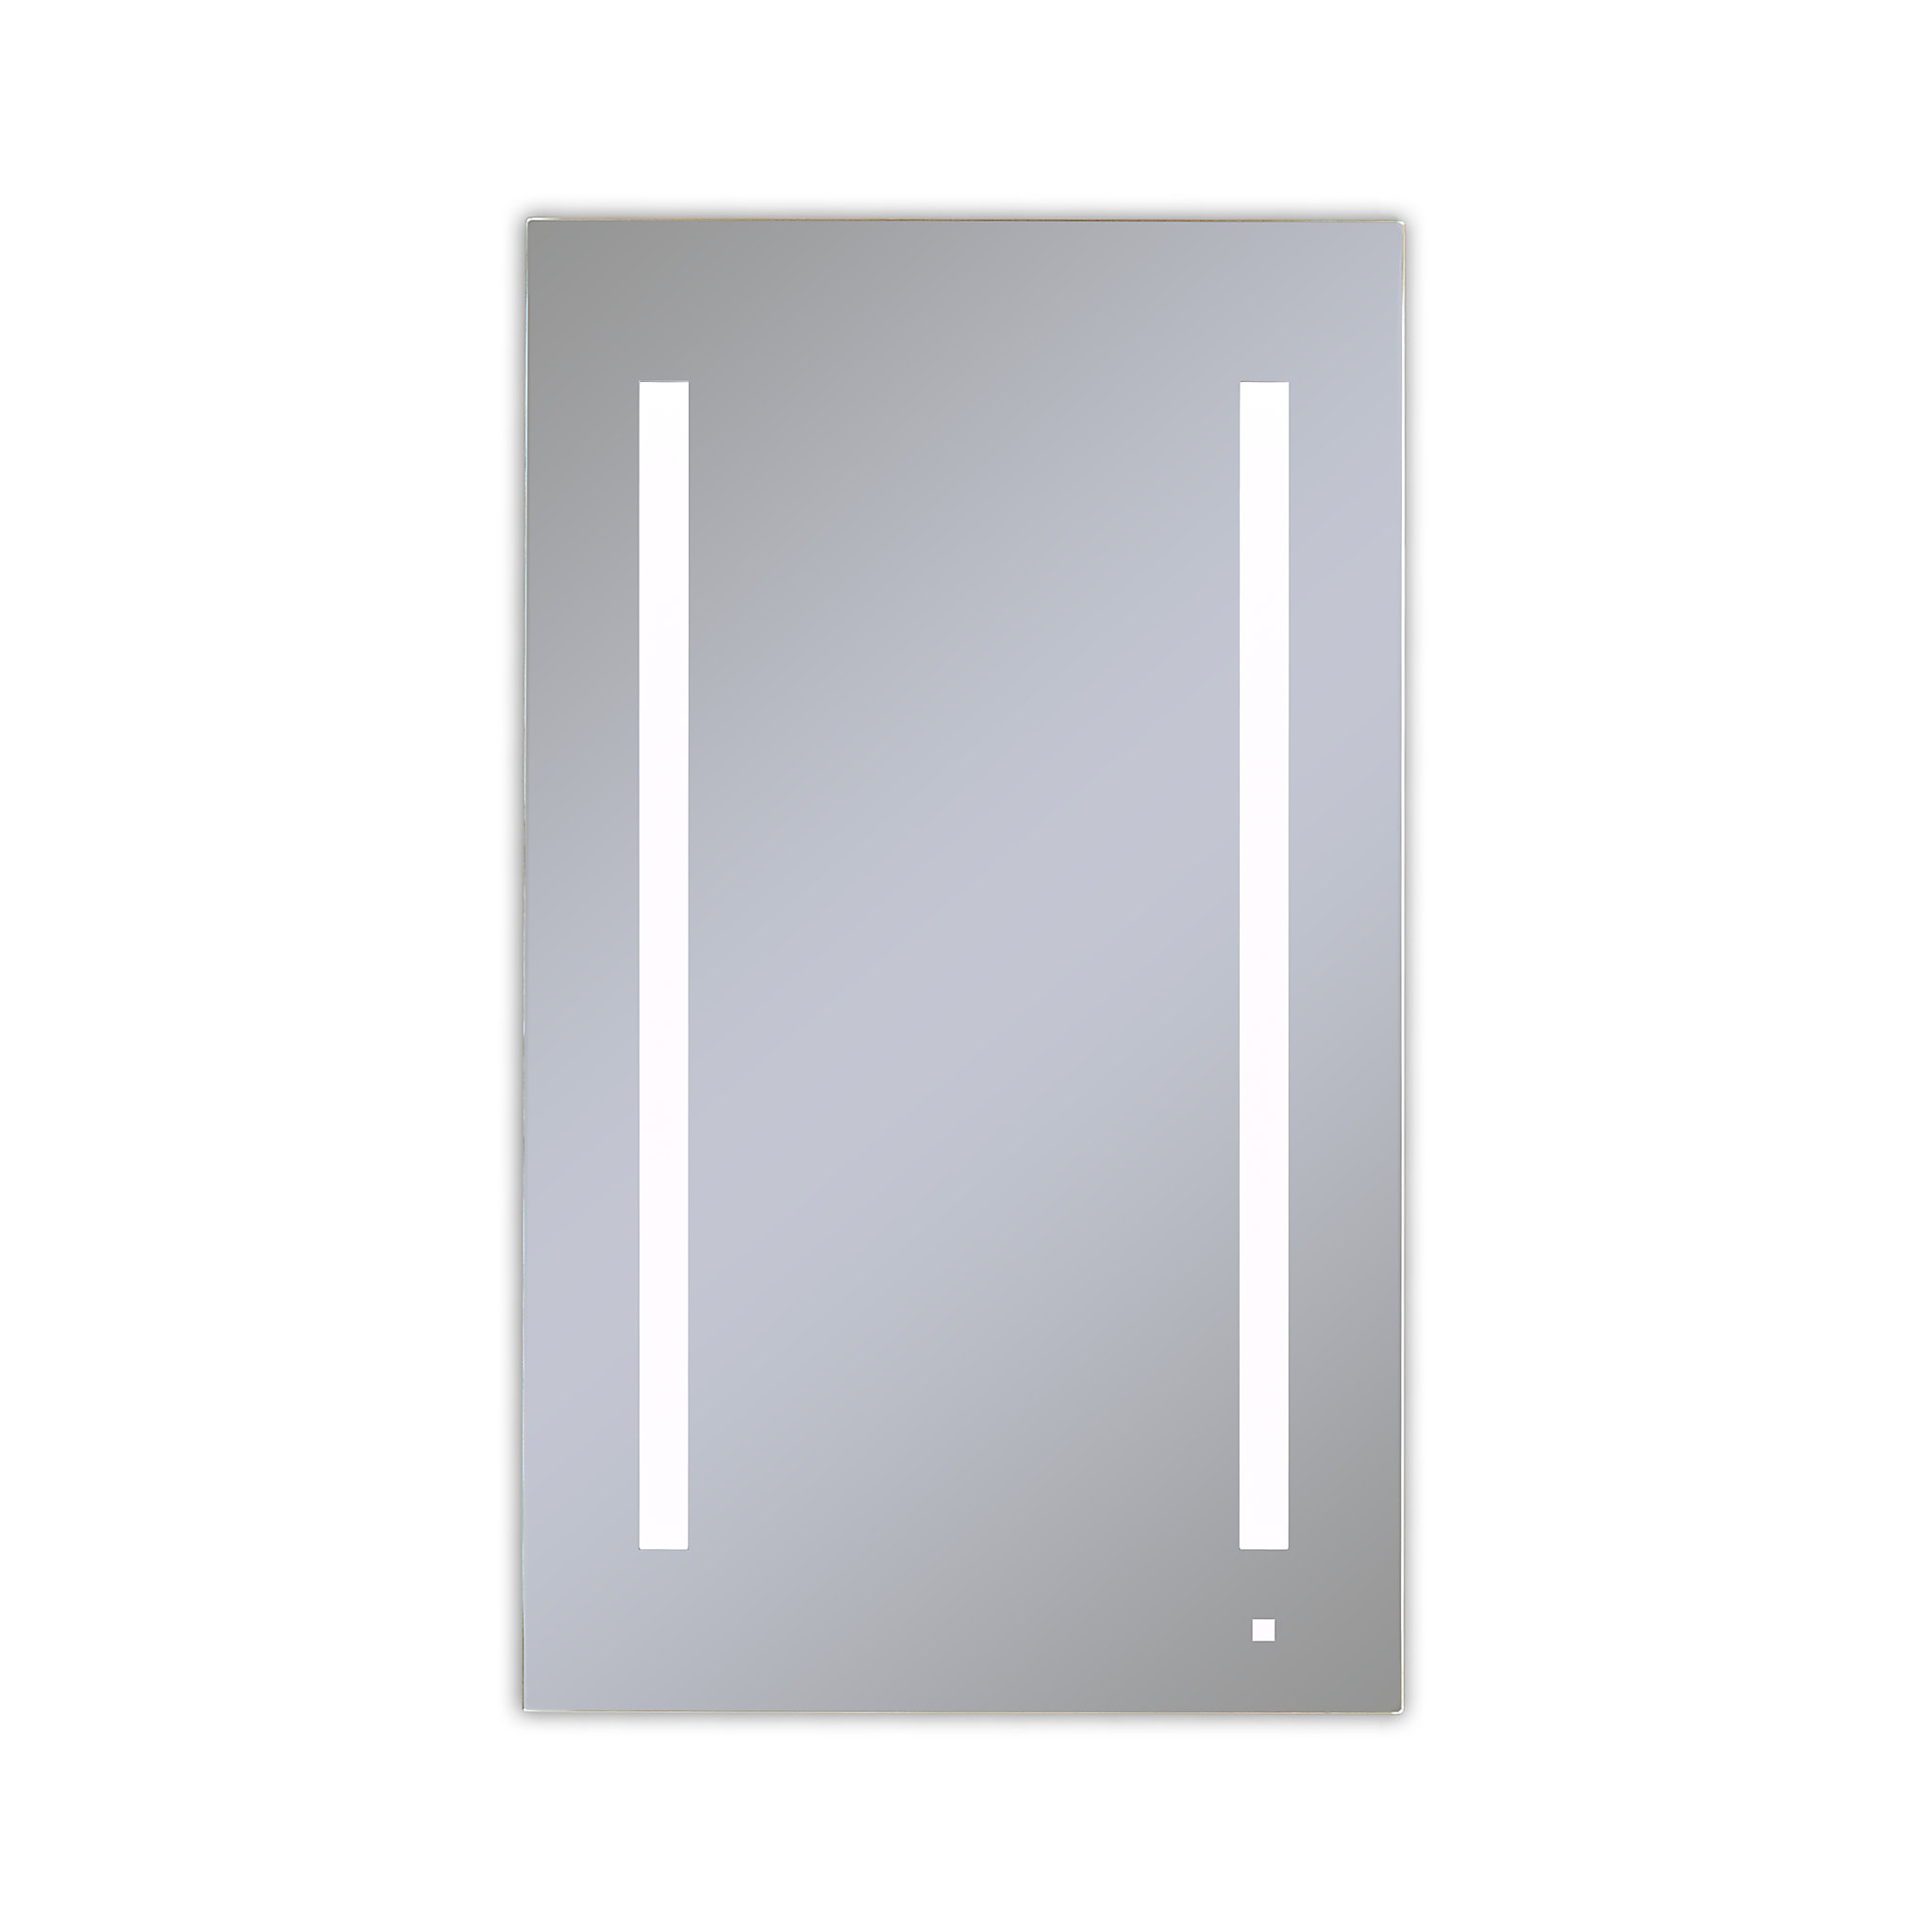 Robern AC2440D4P1LA AiO Lighted Cabinet, 24" x 40" x 4", LUM Lighting, 4000K Temperature (Cool Light), Dimmable, OM Audio, Elect - Click Image to Close